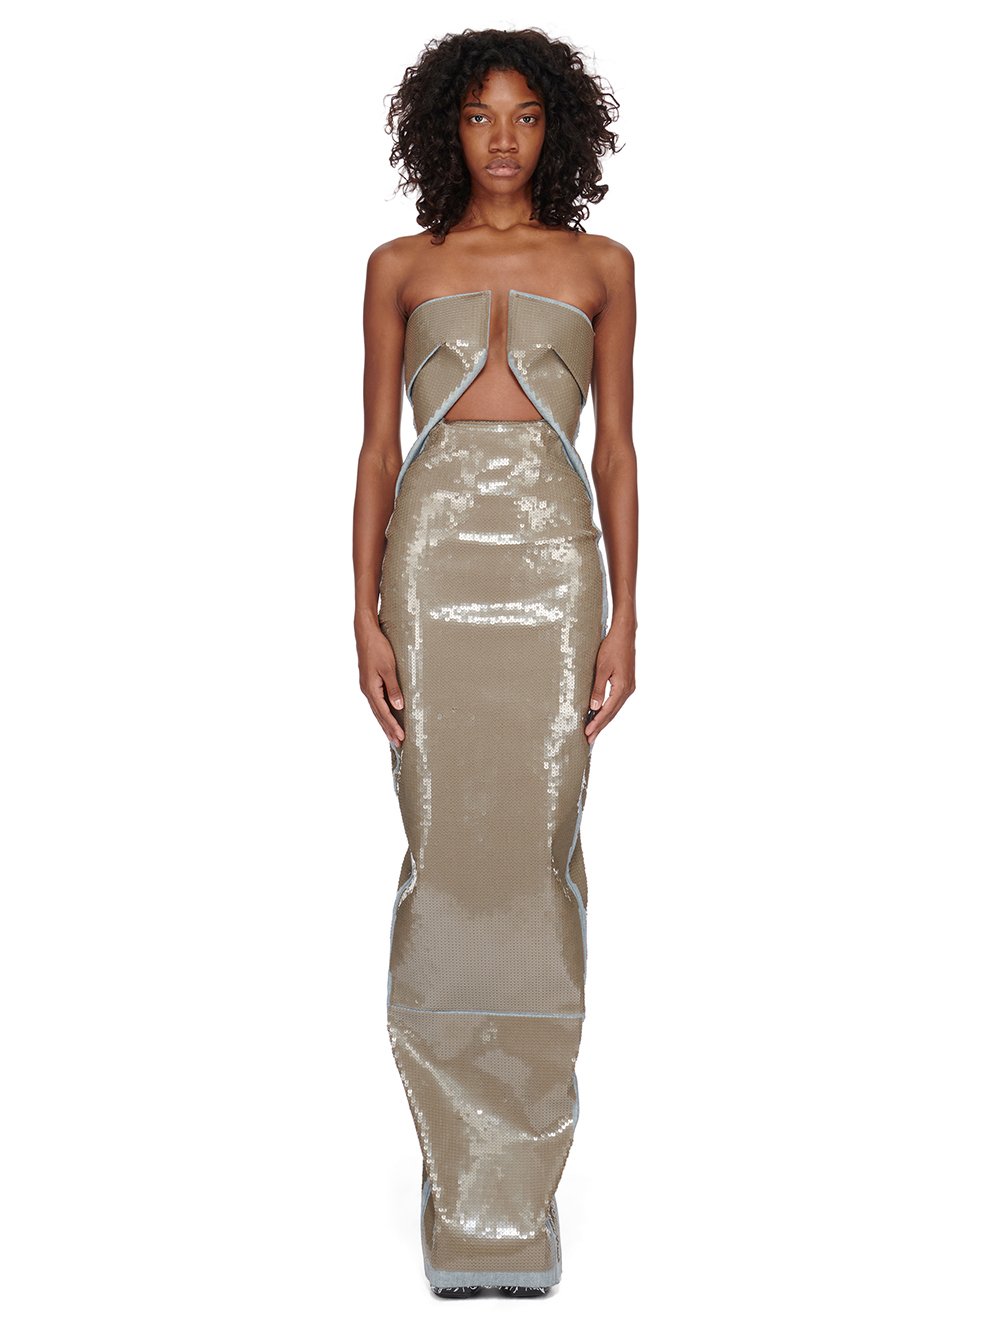 RICK OWENS FW23 LUXOR PRONG GOWN IN BLUE AND DUST SEQUIN EMBROIDERED STRETCH DENIM